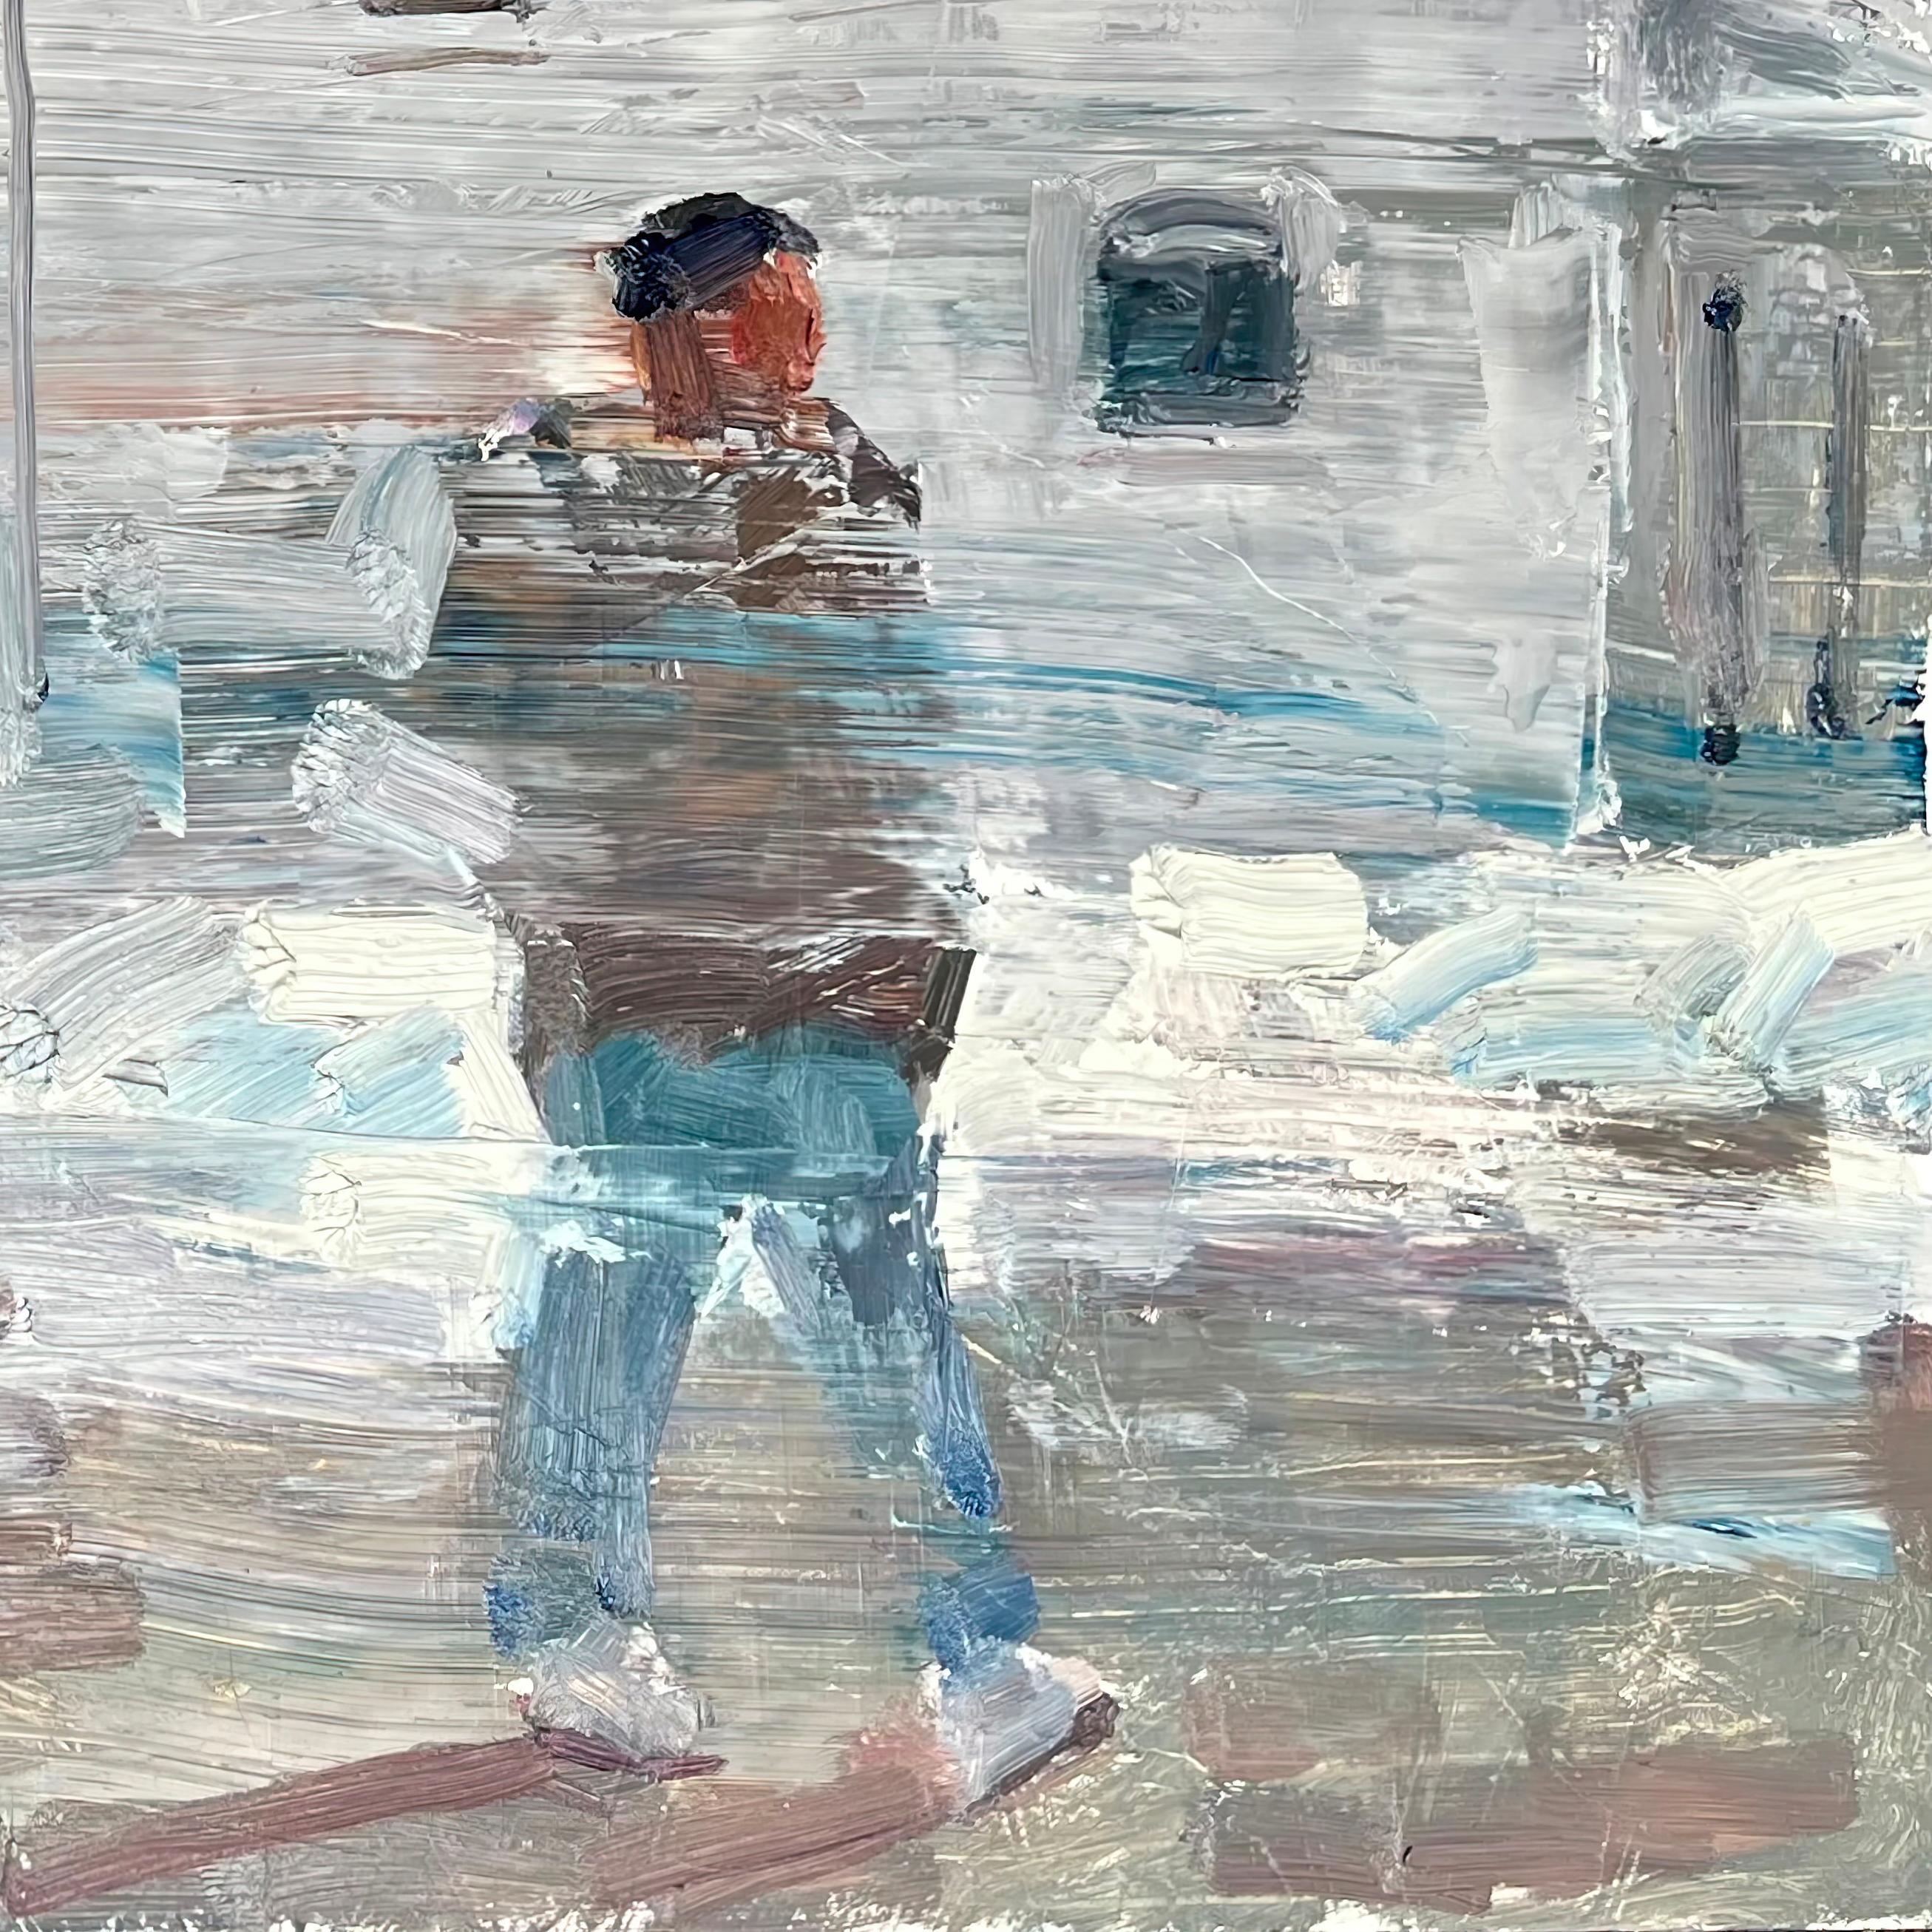 Parking Lot, Original Oil Painting - Gray Figurative Painting by Clyde Steadman